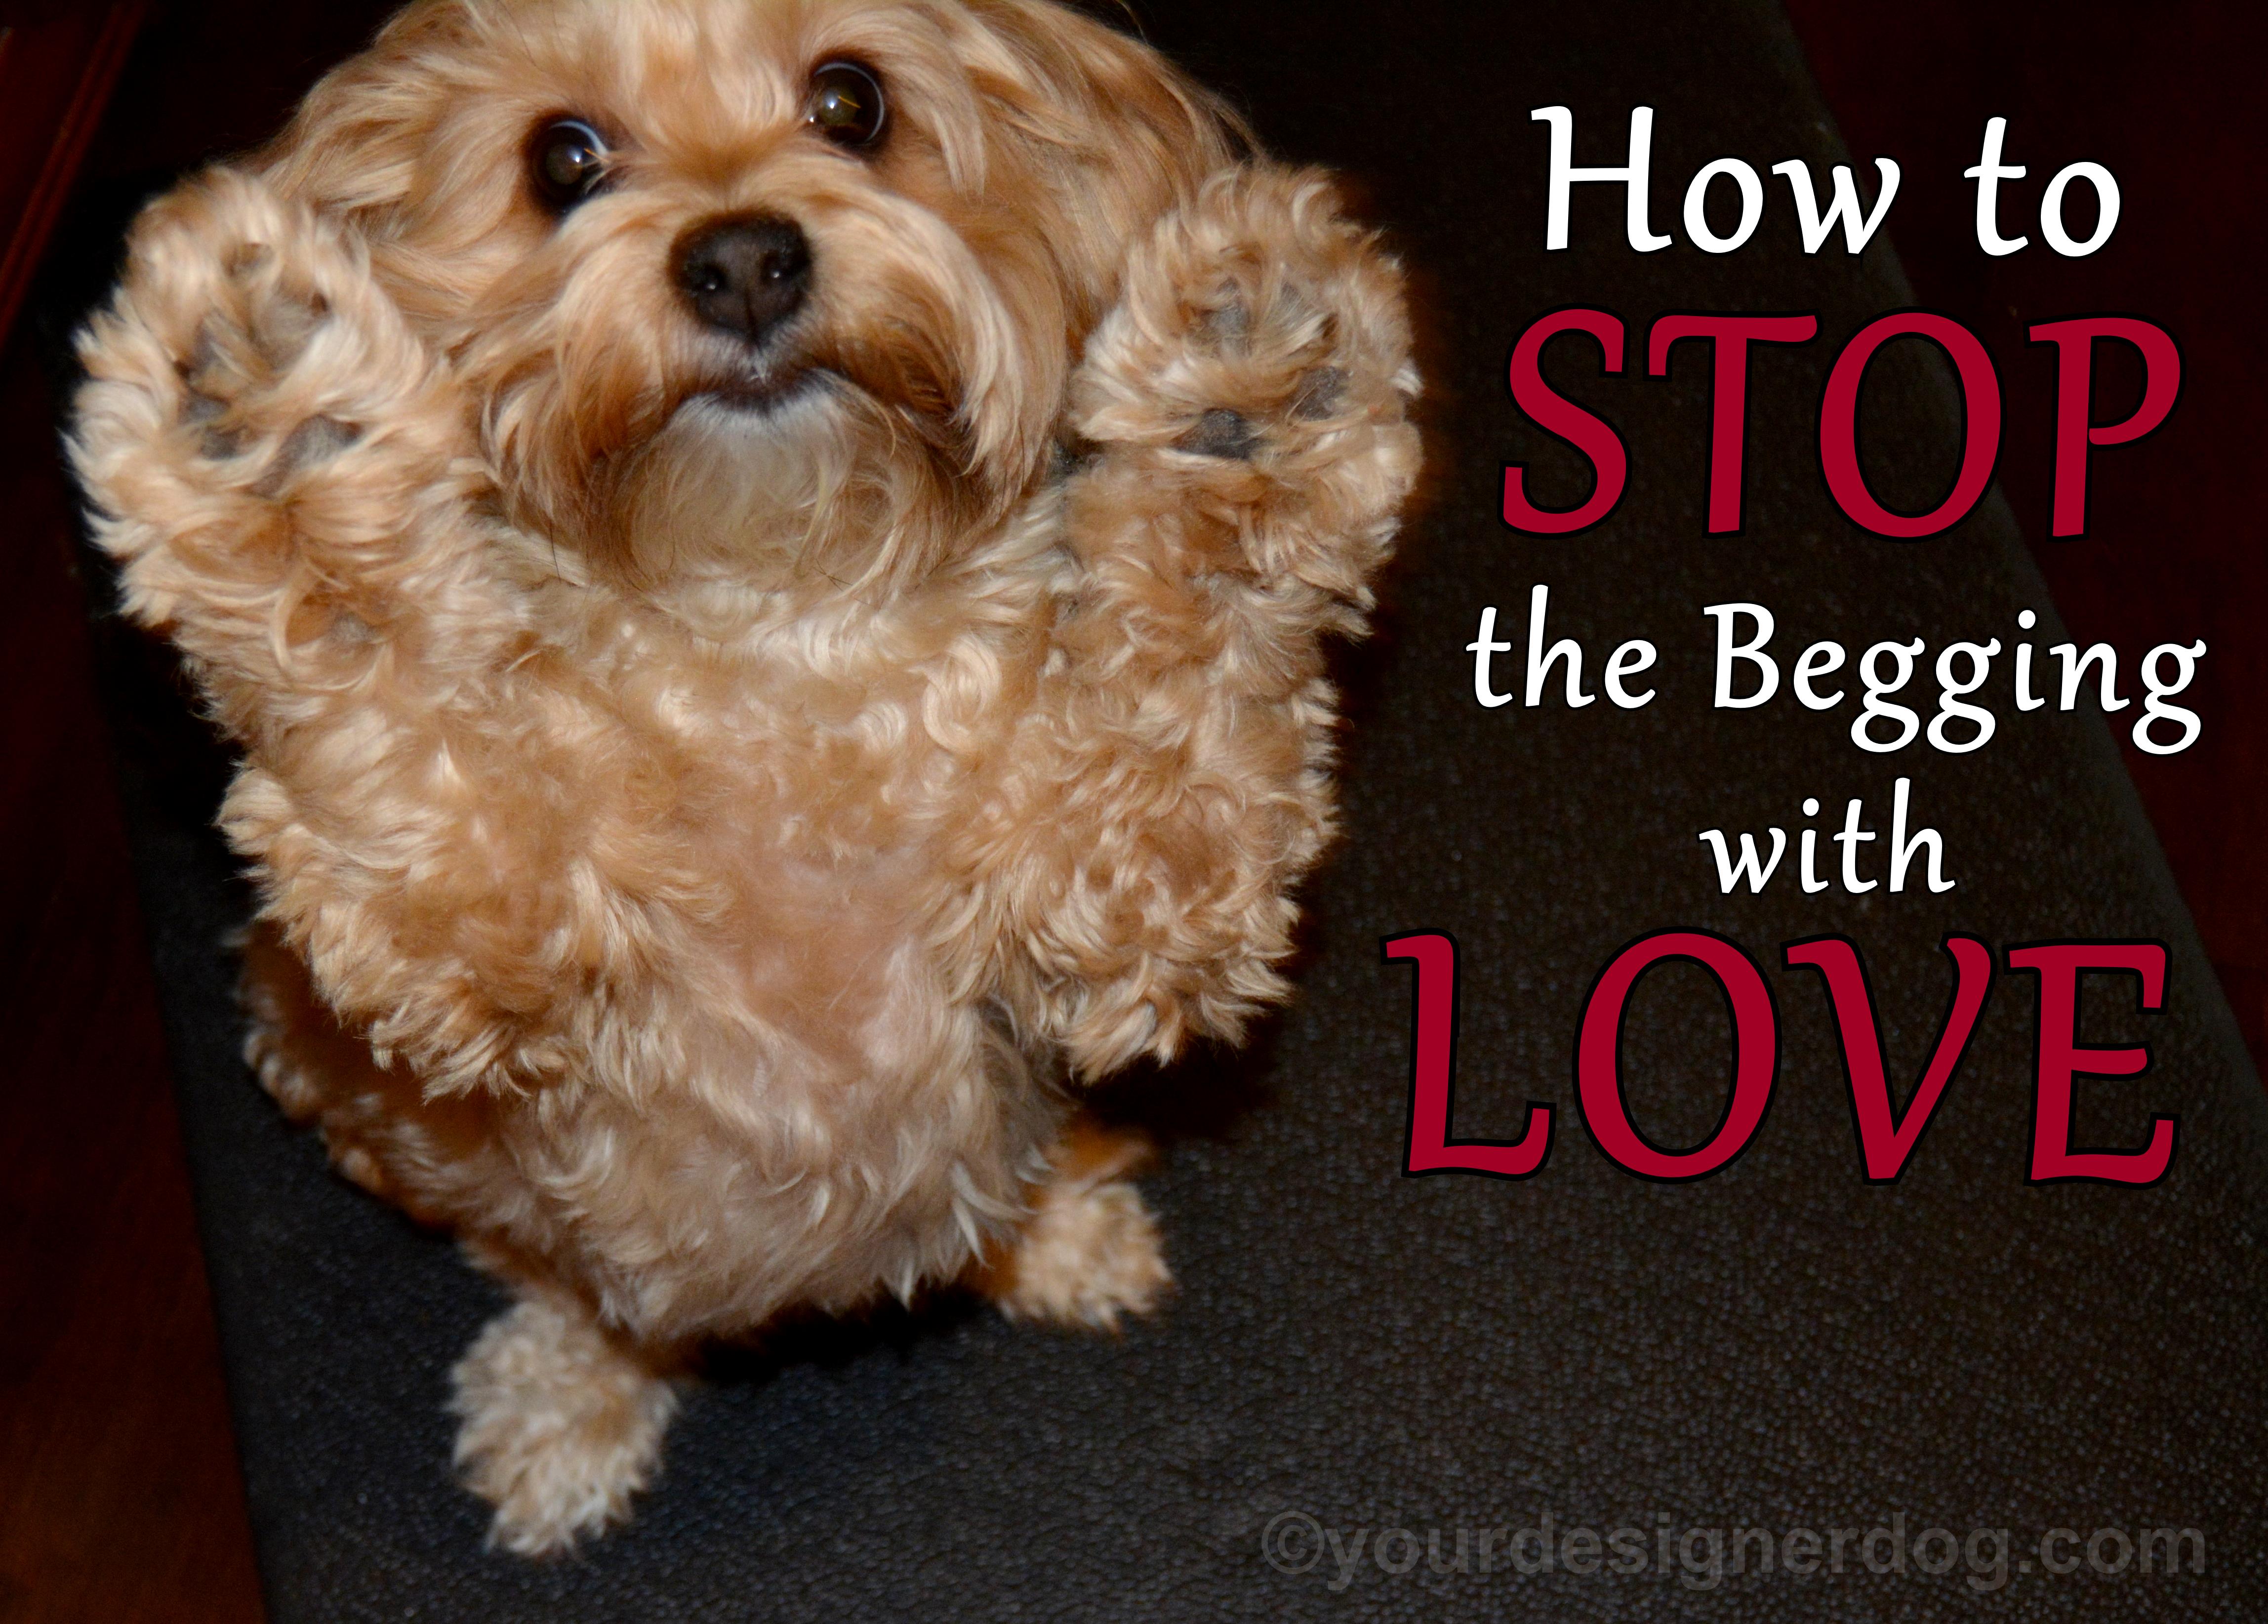 How To Stop the Begging With Love